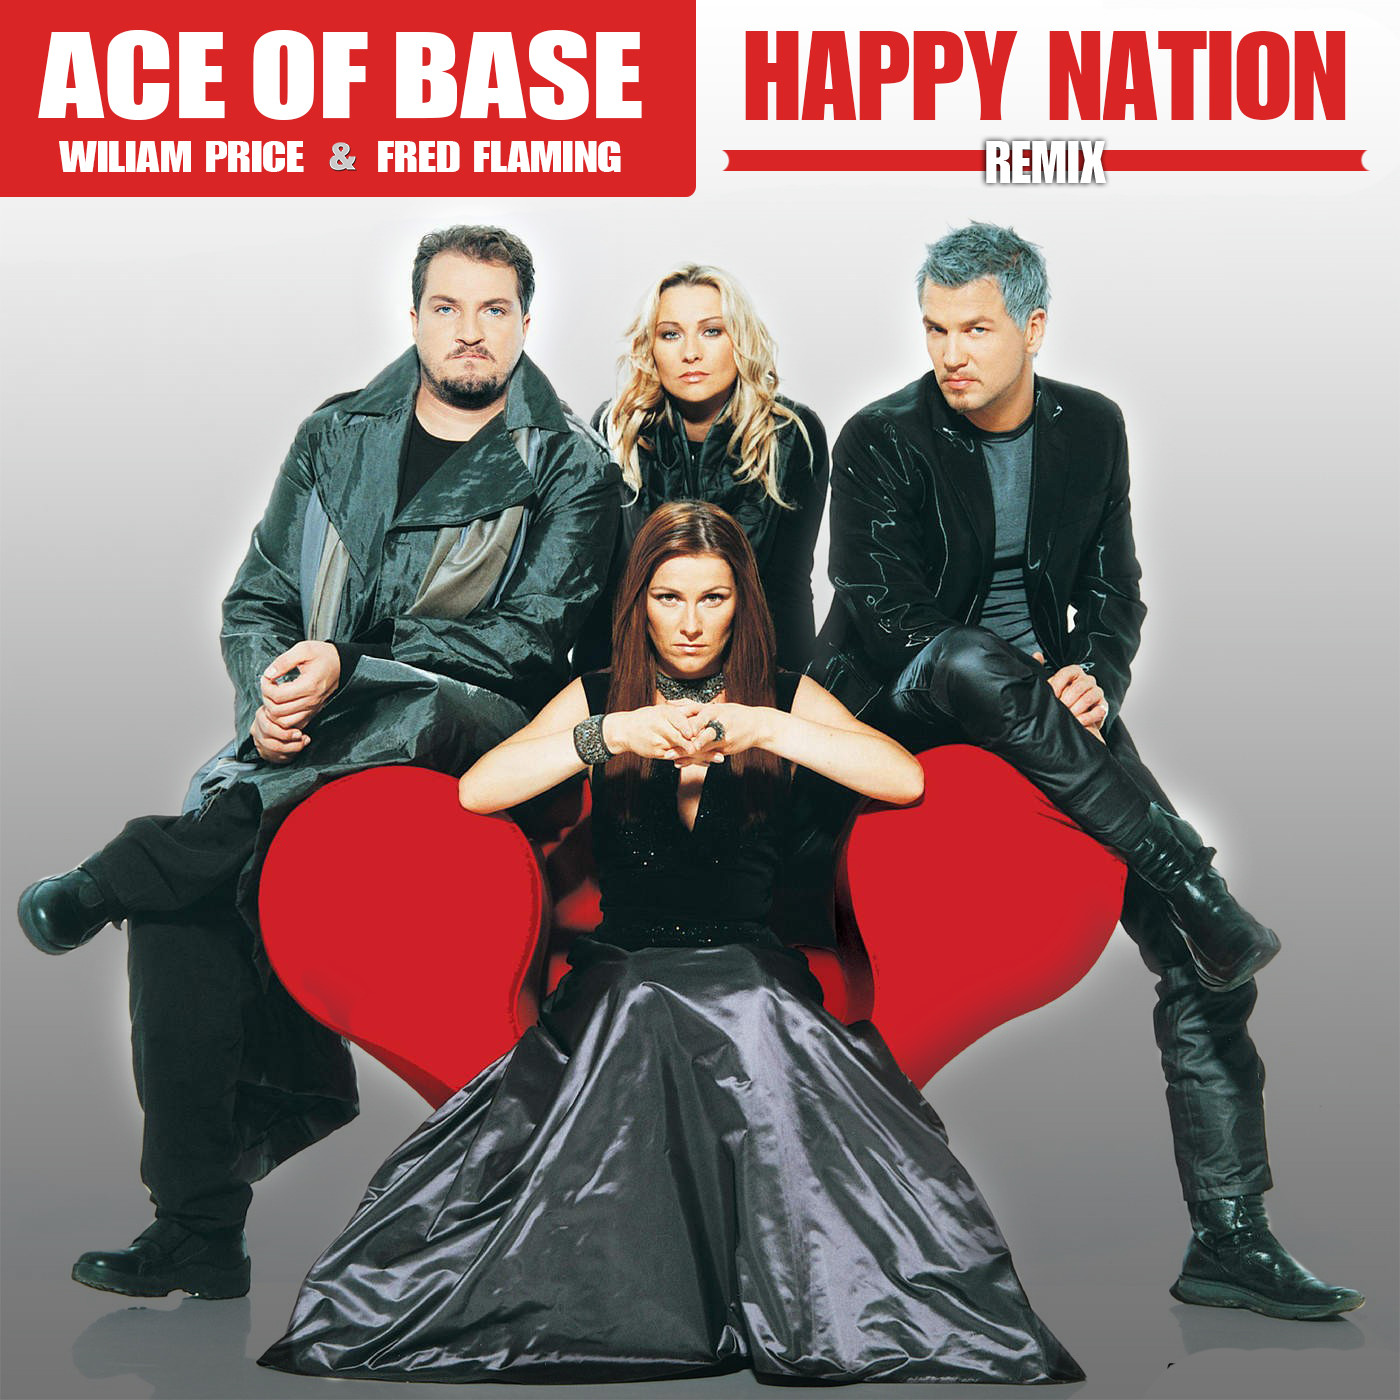 Mandee feat ace of base